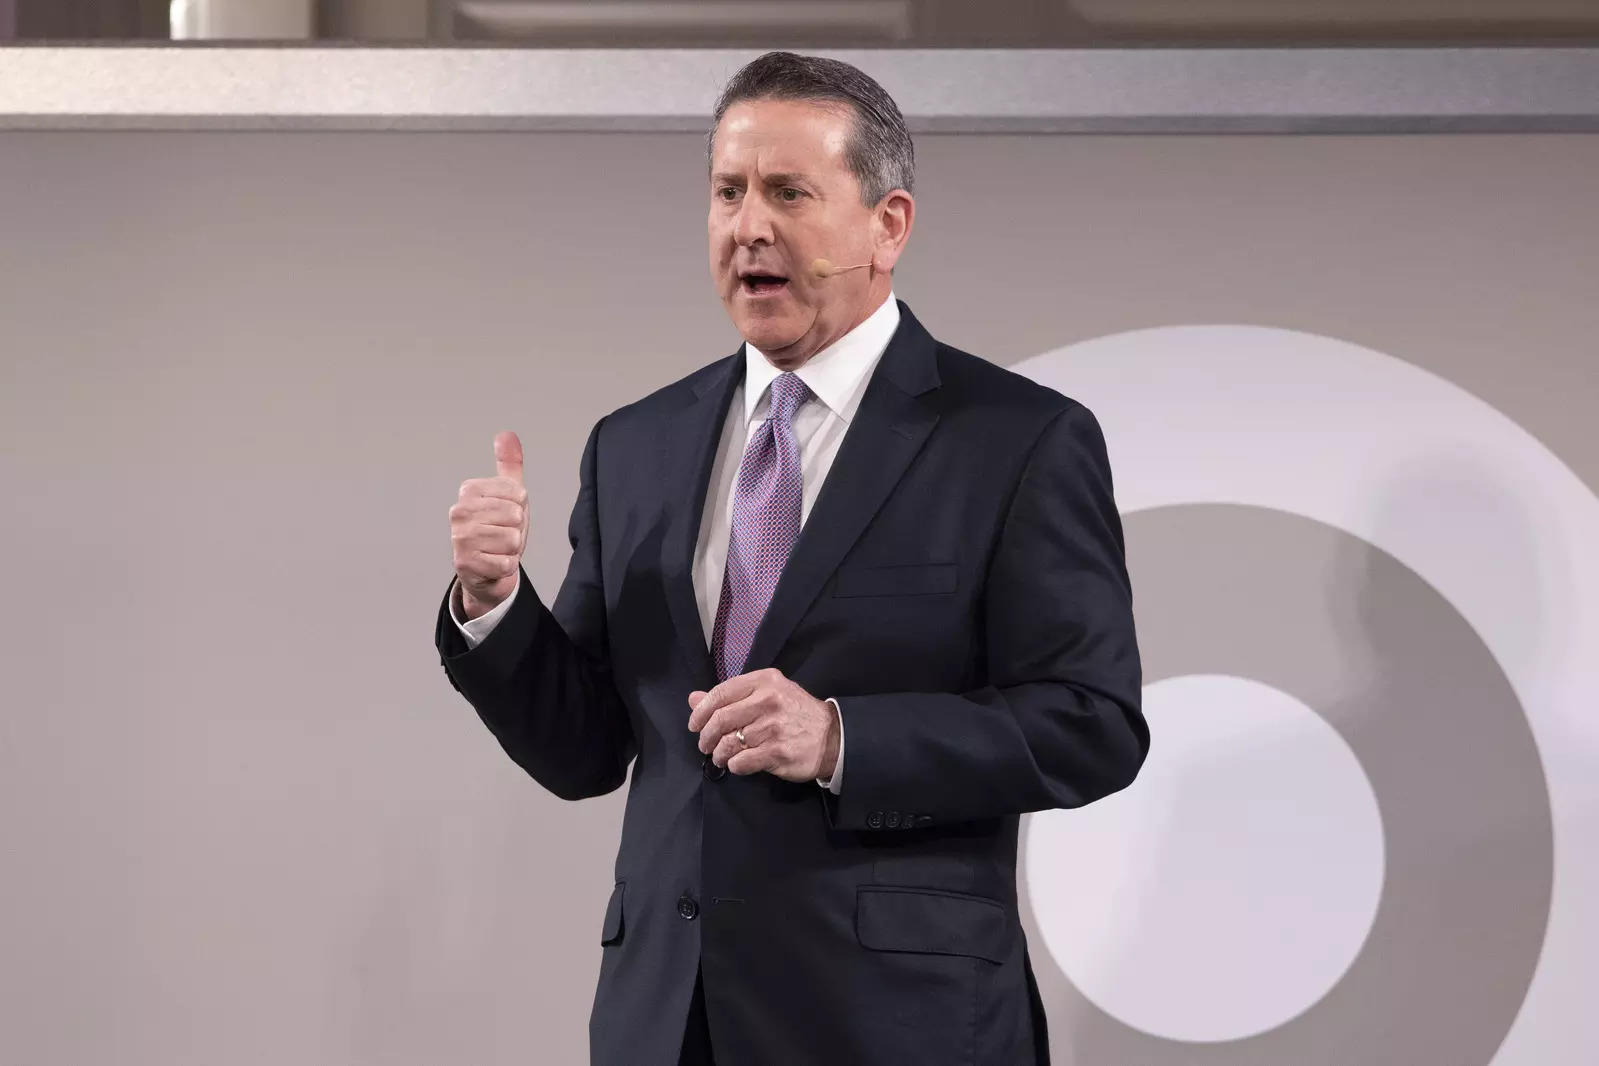  Brian Cornell, CEO, Target